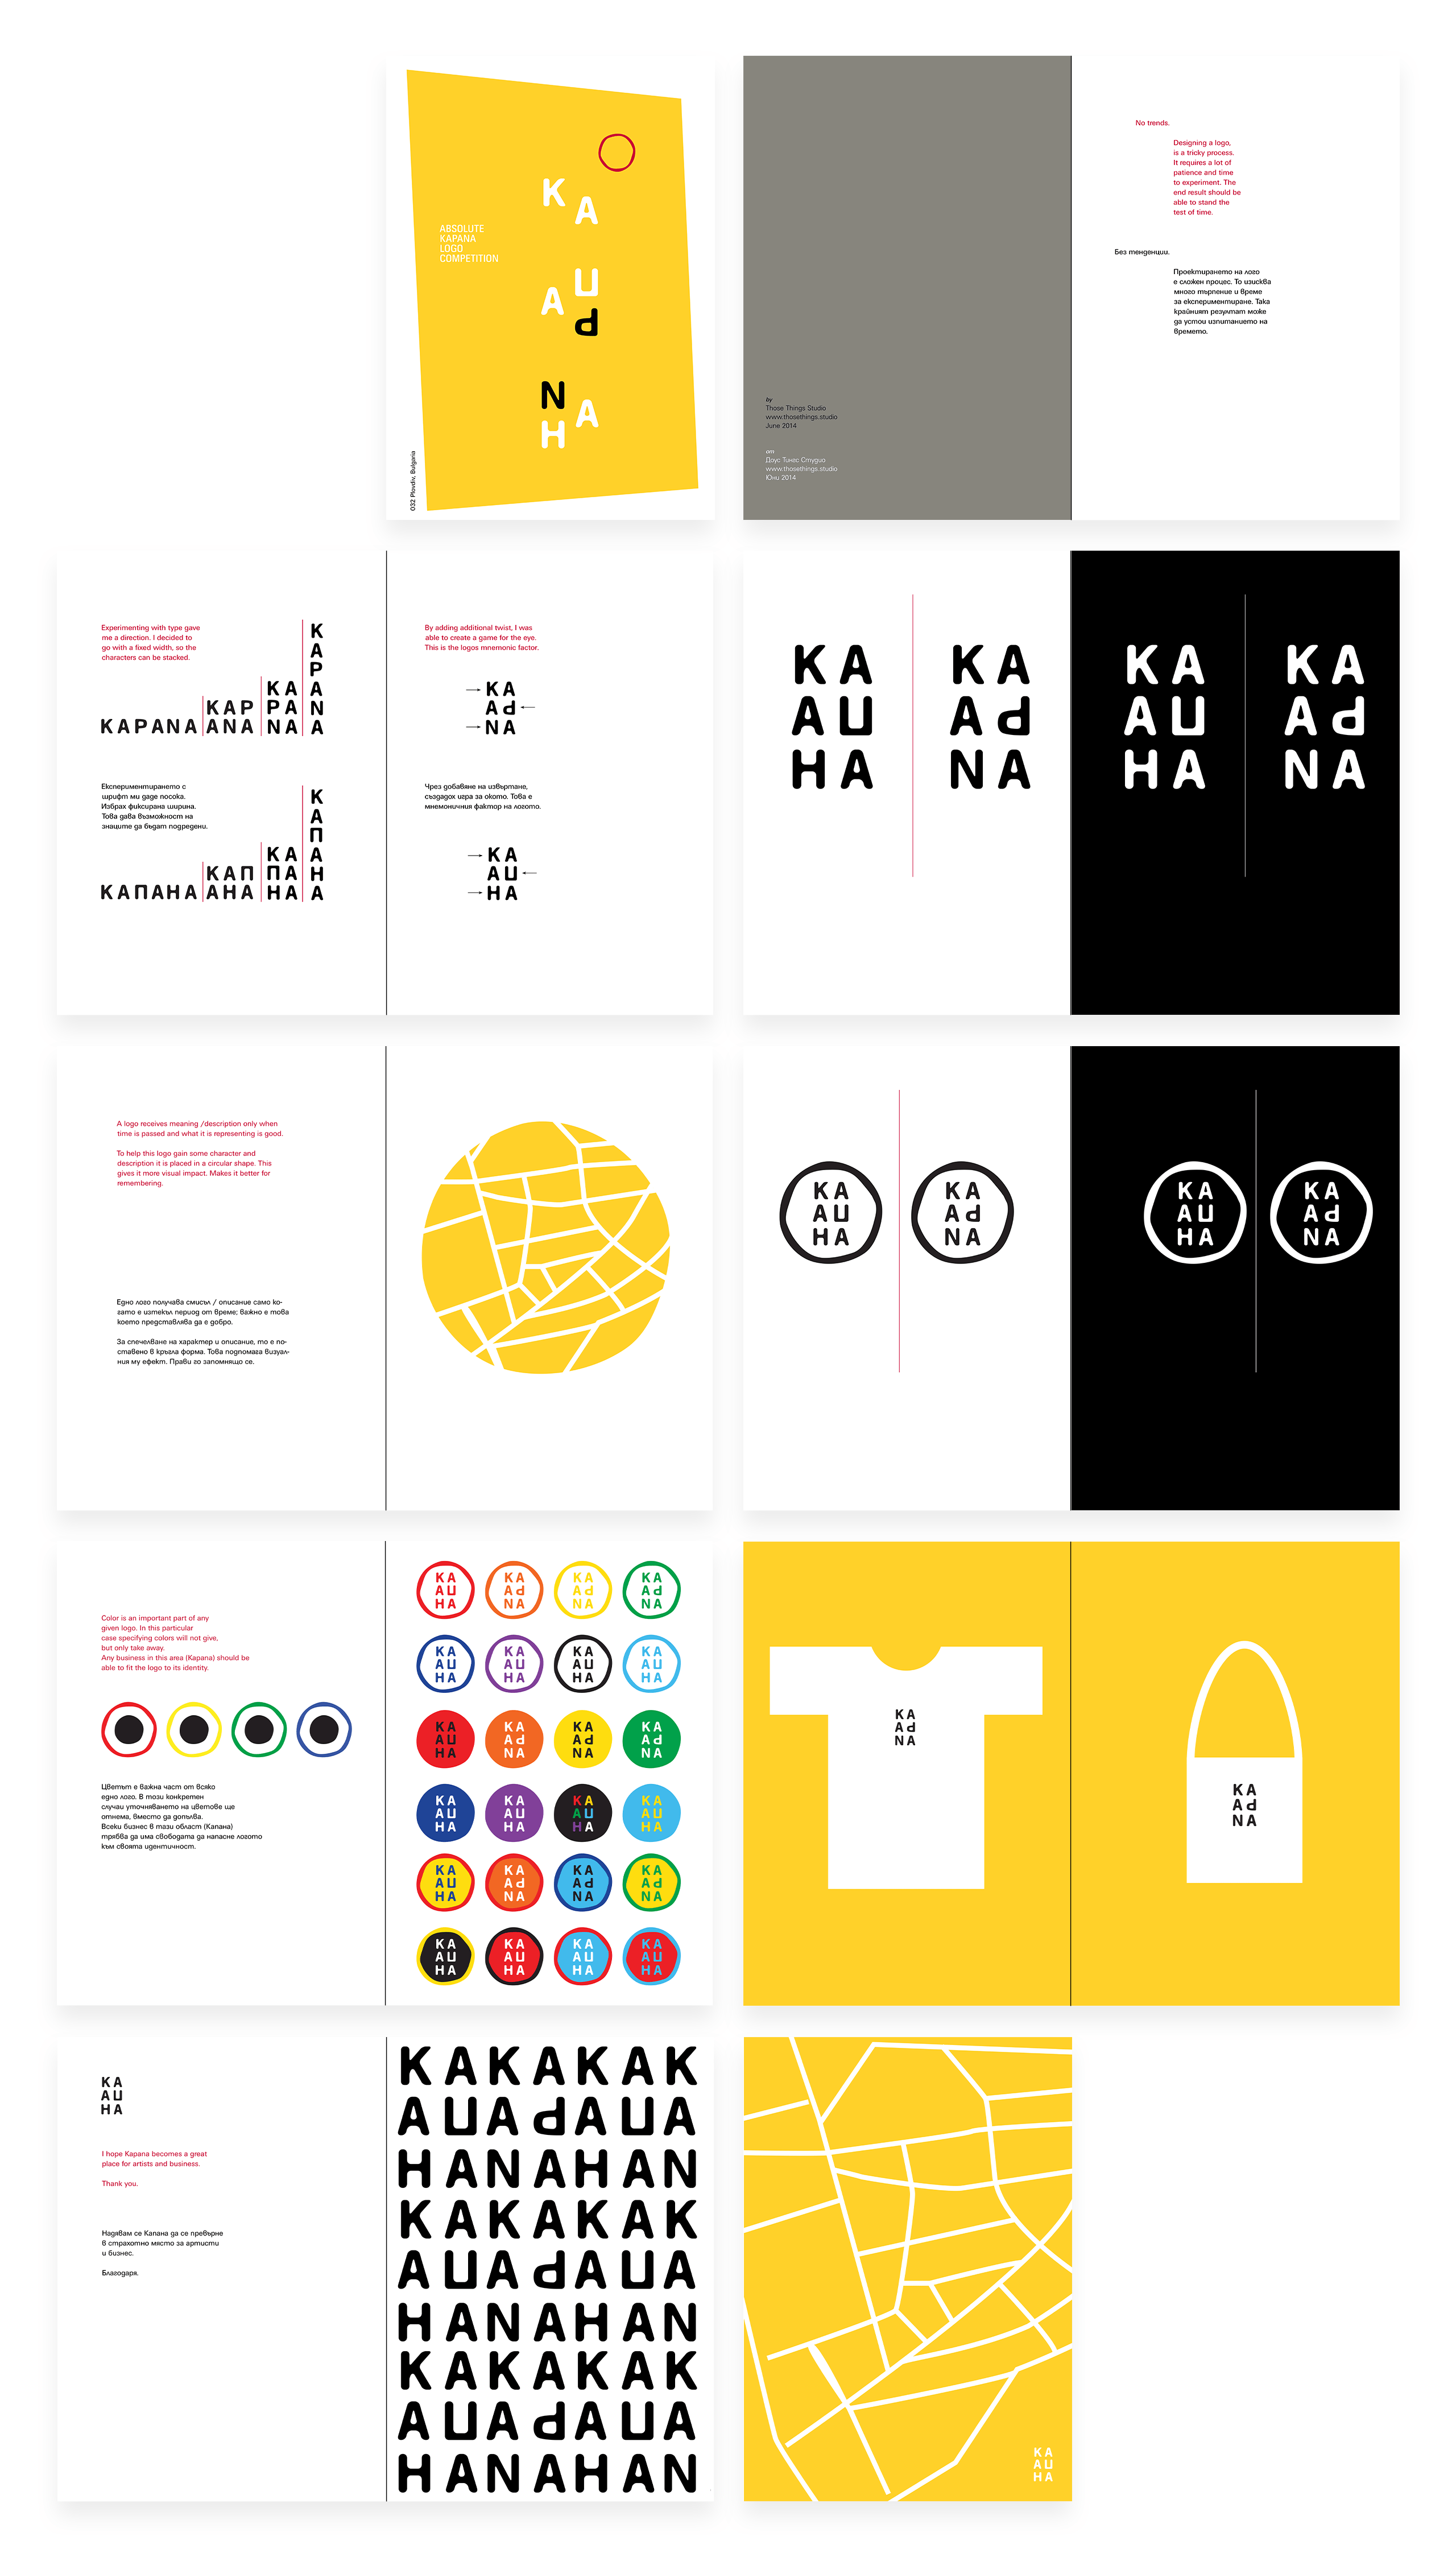 Kapana Logo and Identity pages from a booklet